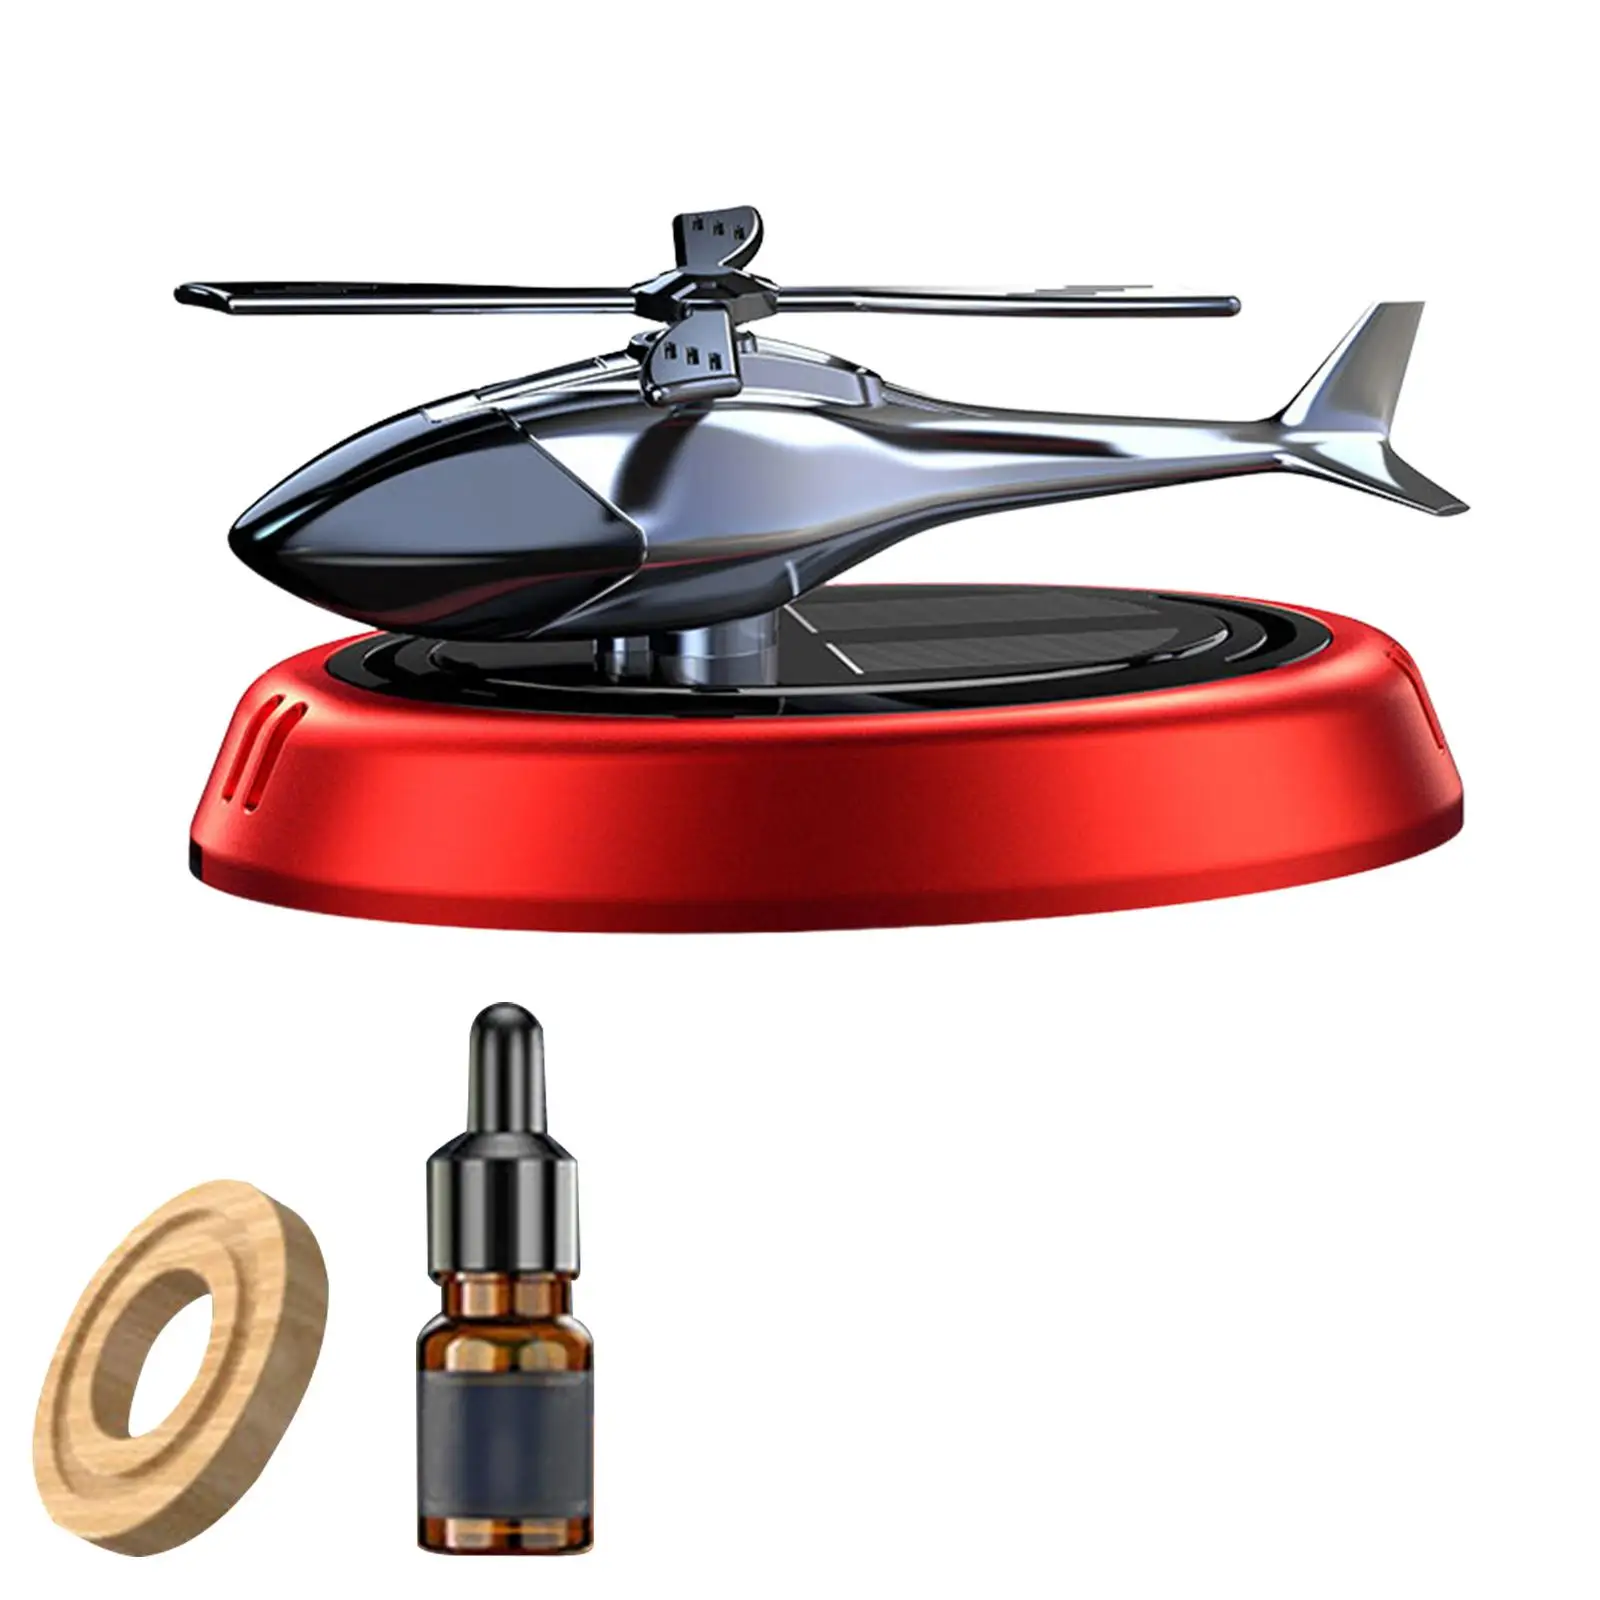 Helicopter Car Air Freshener Perfume Diffuser decor Ornament Office